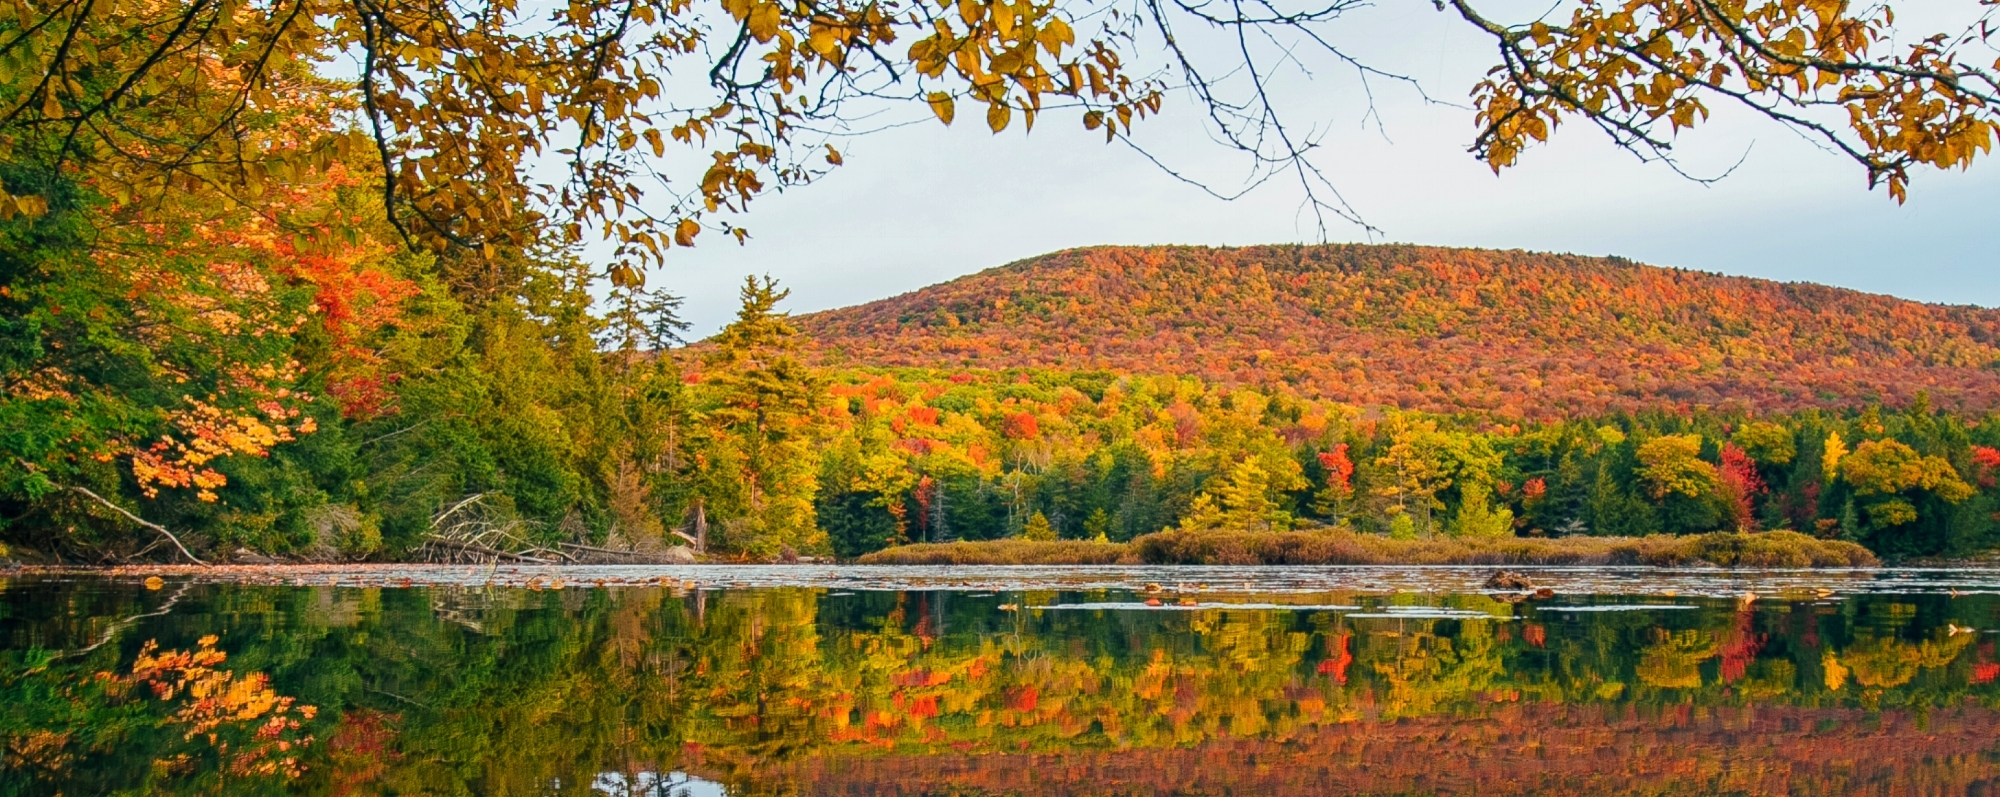 The Catskills, New York: Mountains, Rivers, Sports and History